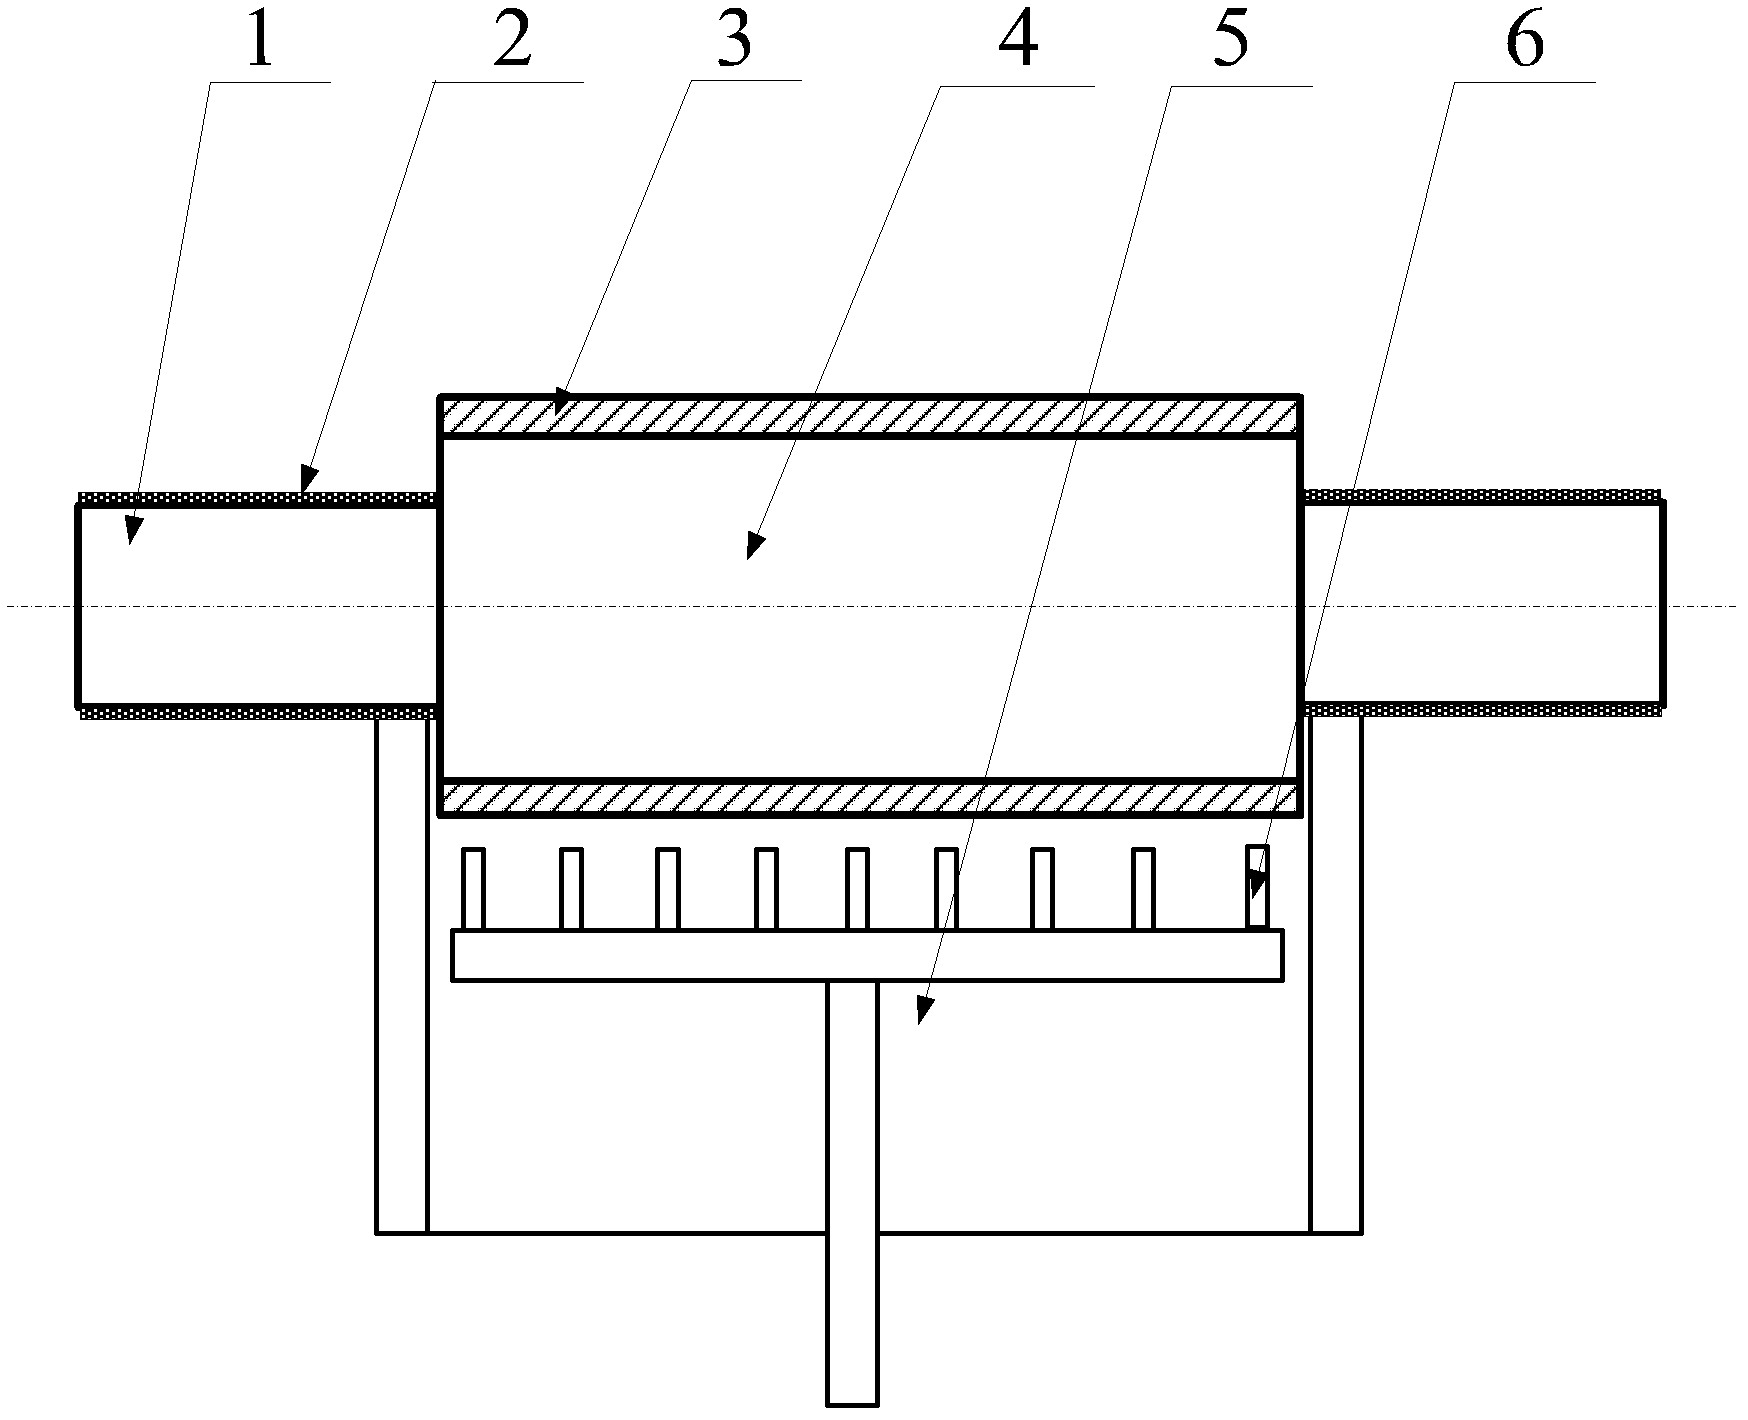 Composite roll having uniform roll surface hardness and made of high-speed steel containing boron and method for manufacturing composite roll